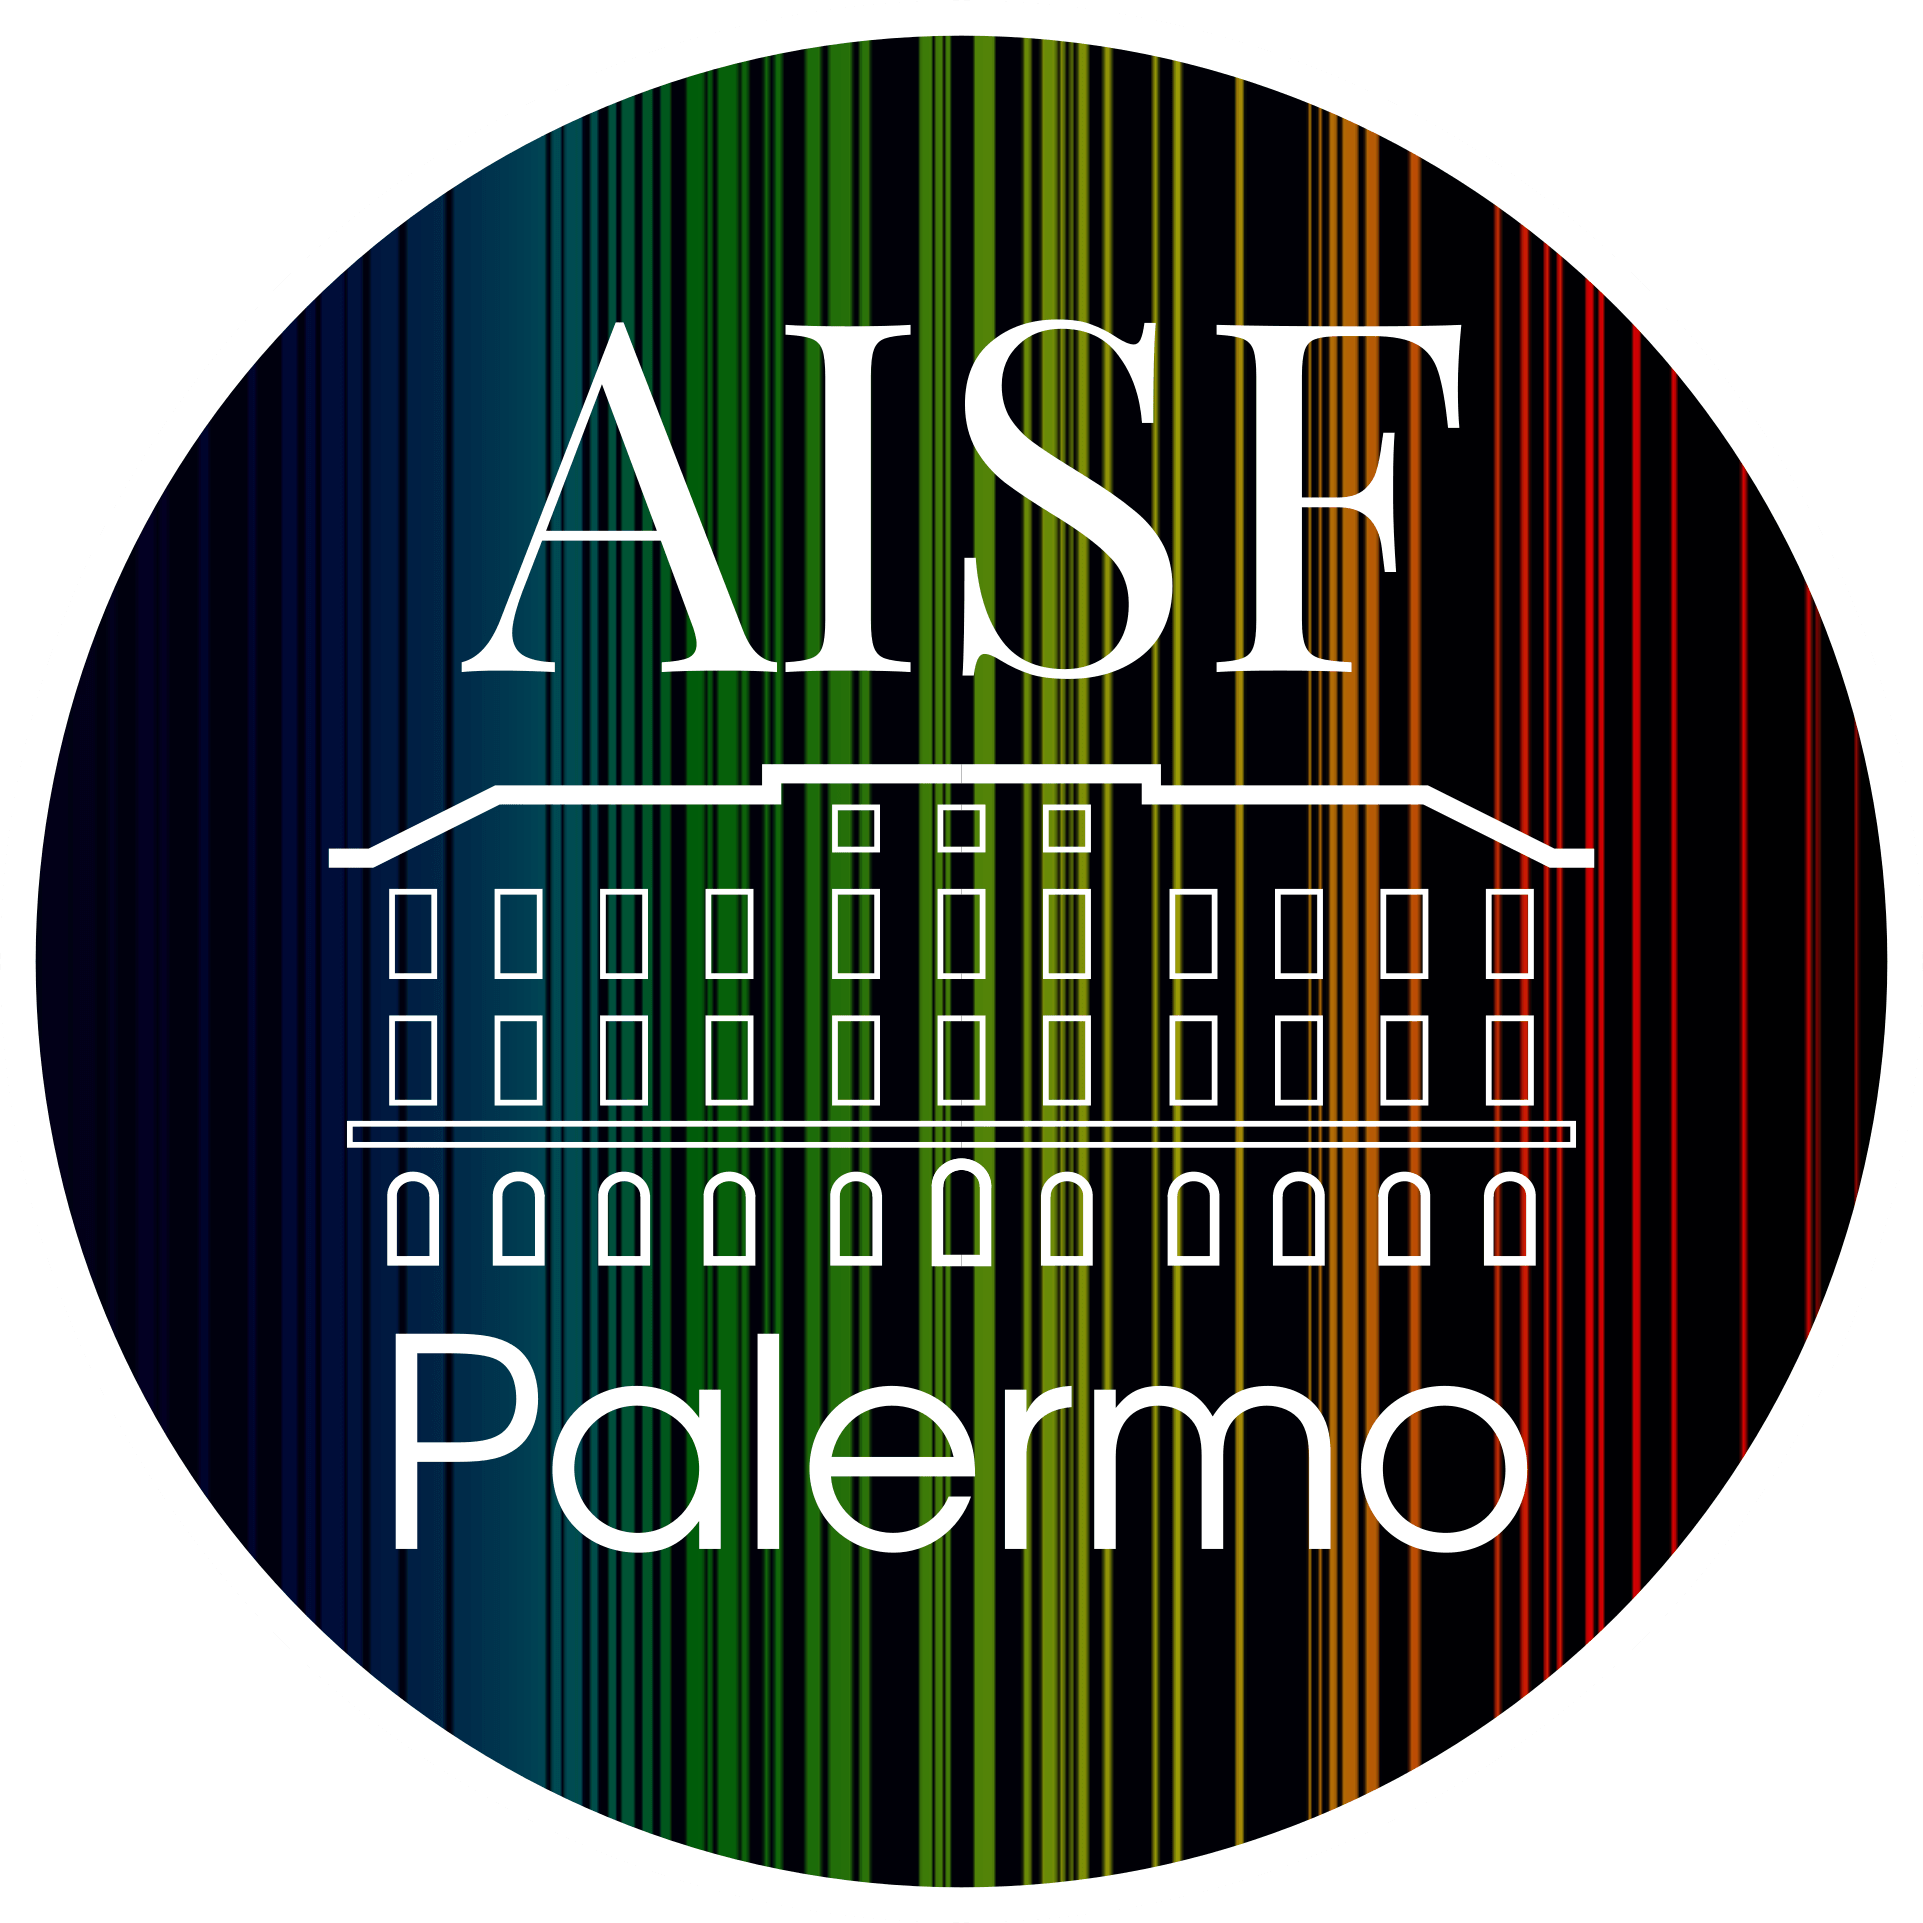 aisf_palermo_logo.png